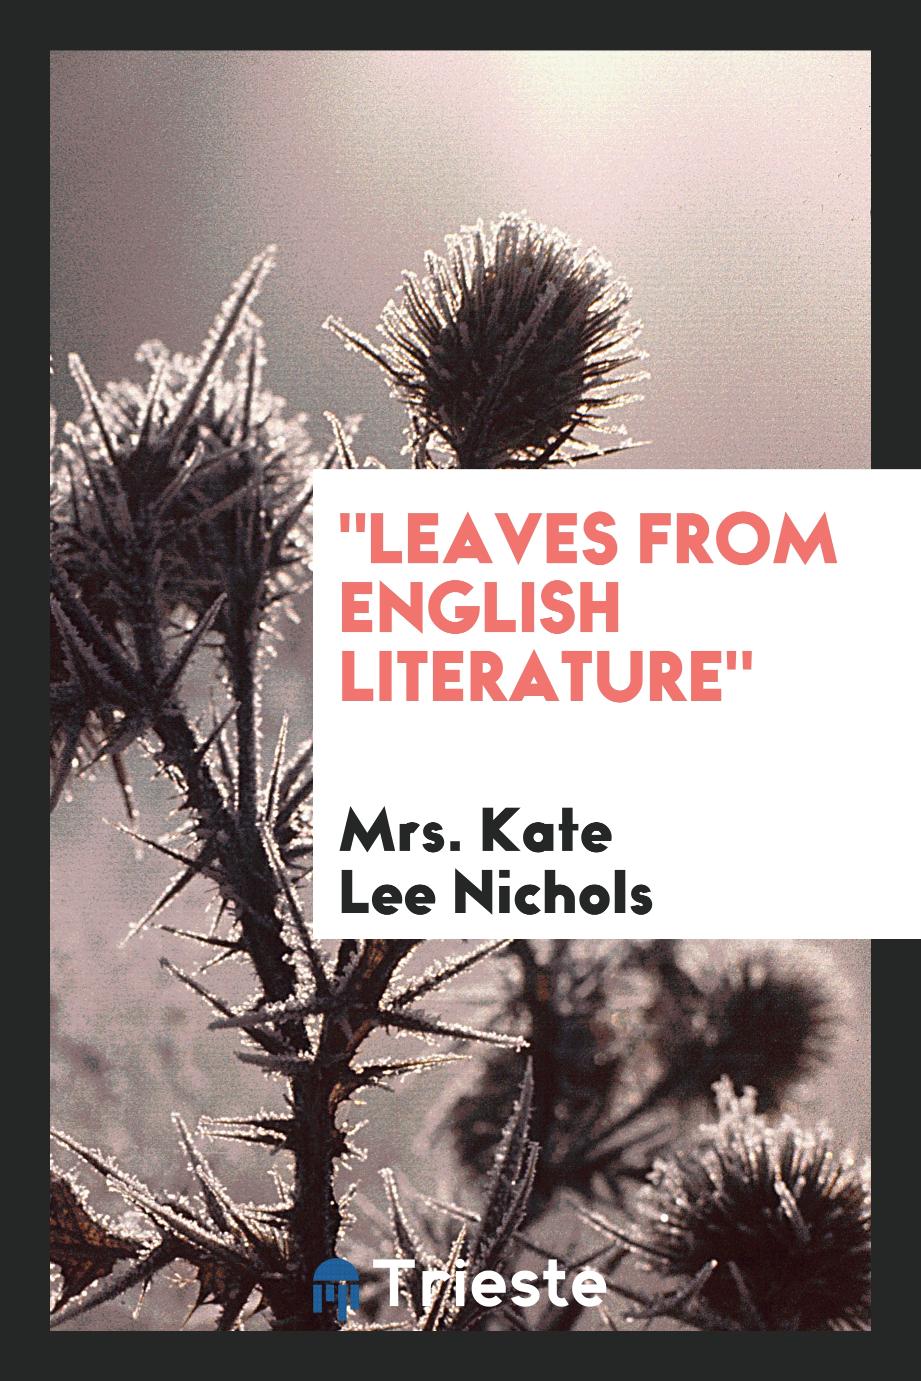 "Leaves from English Literature"